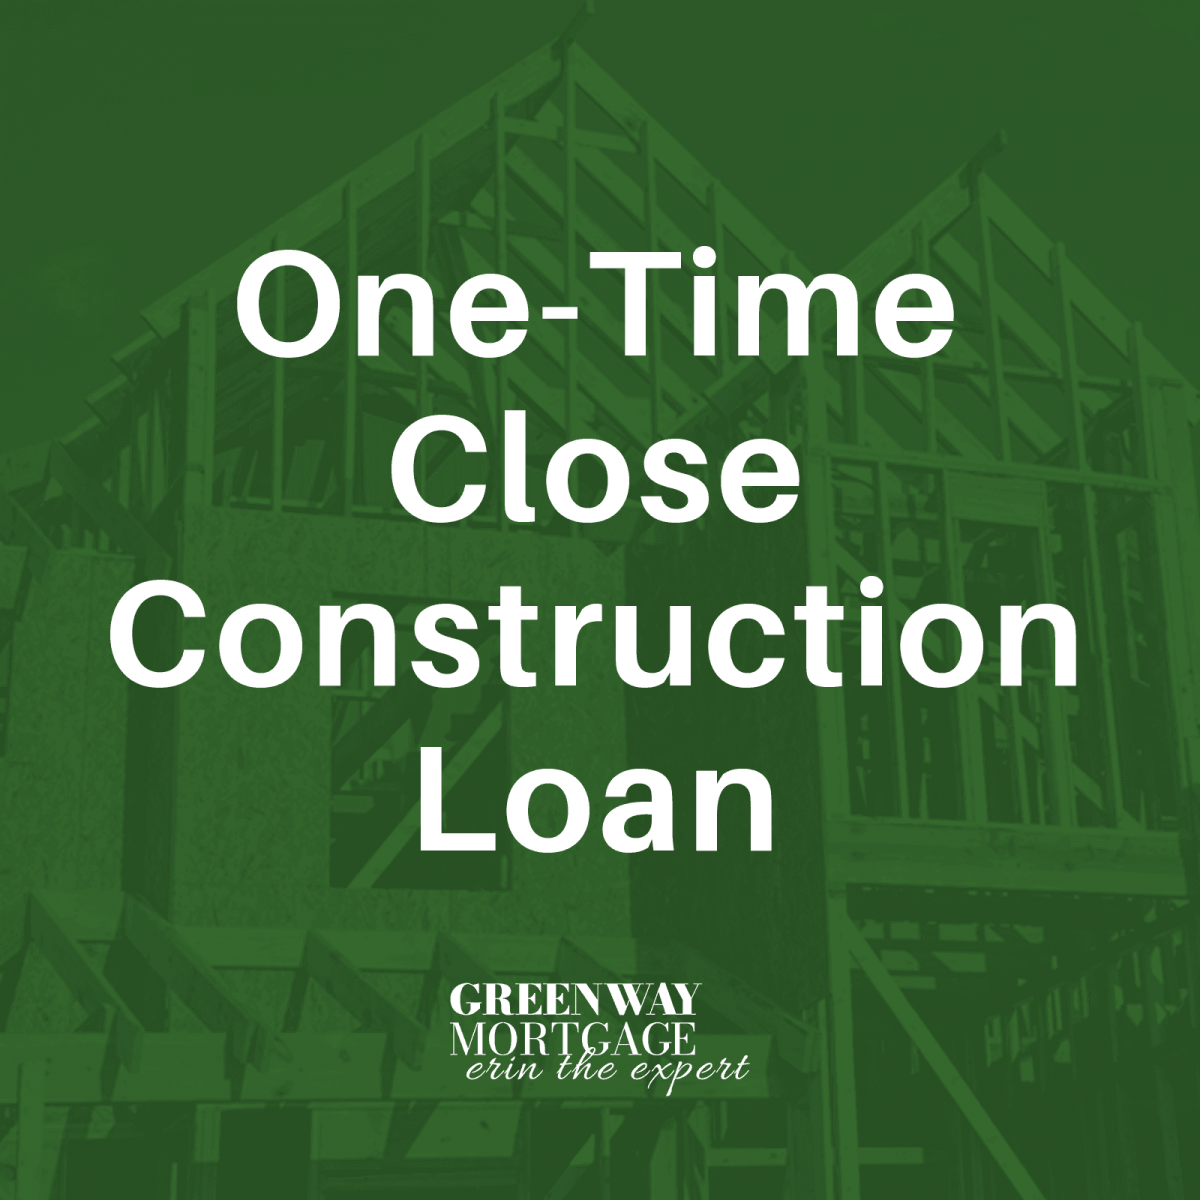 One-Time Close Construction Loan